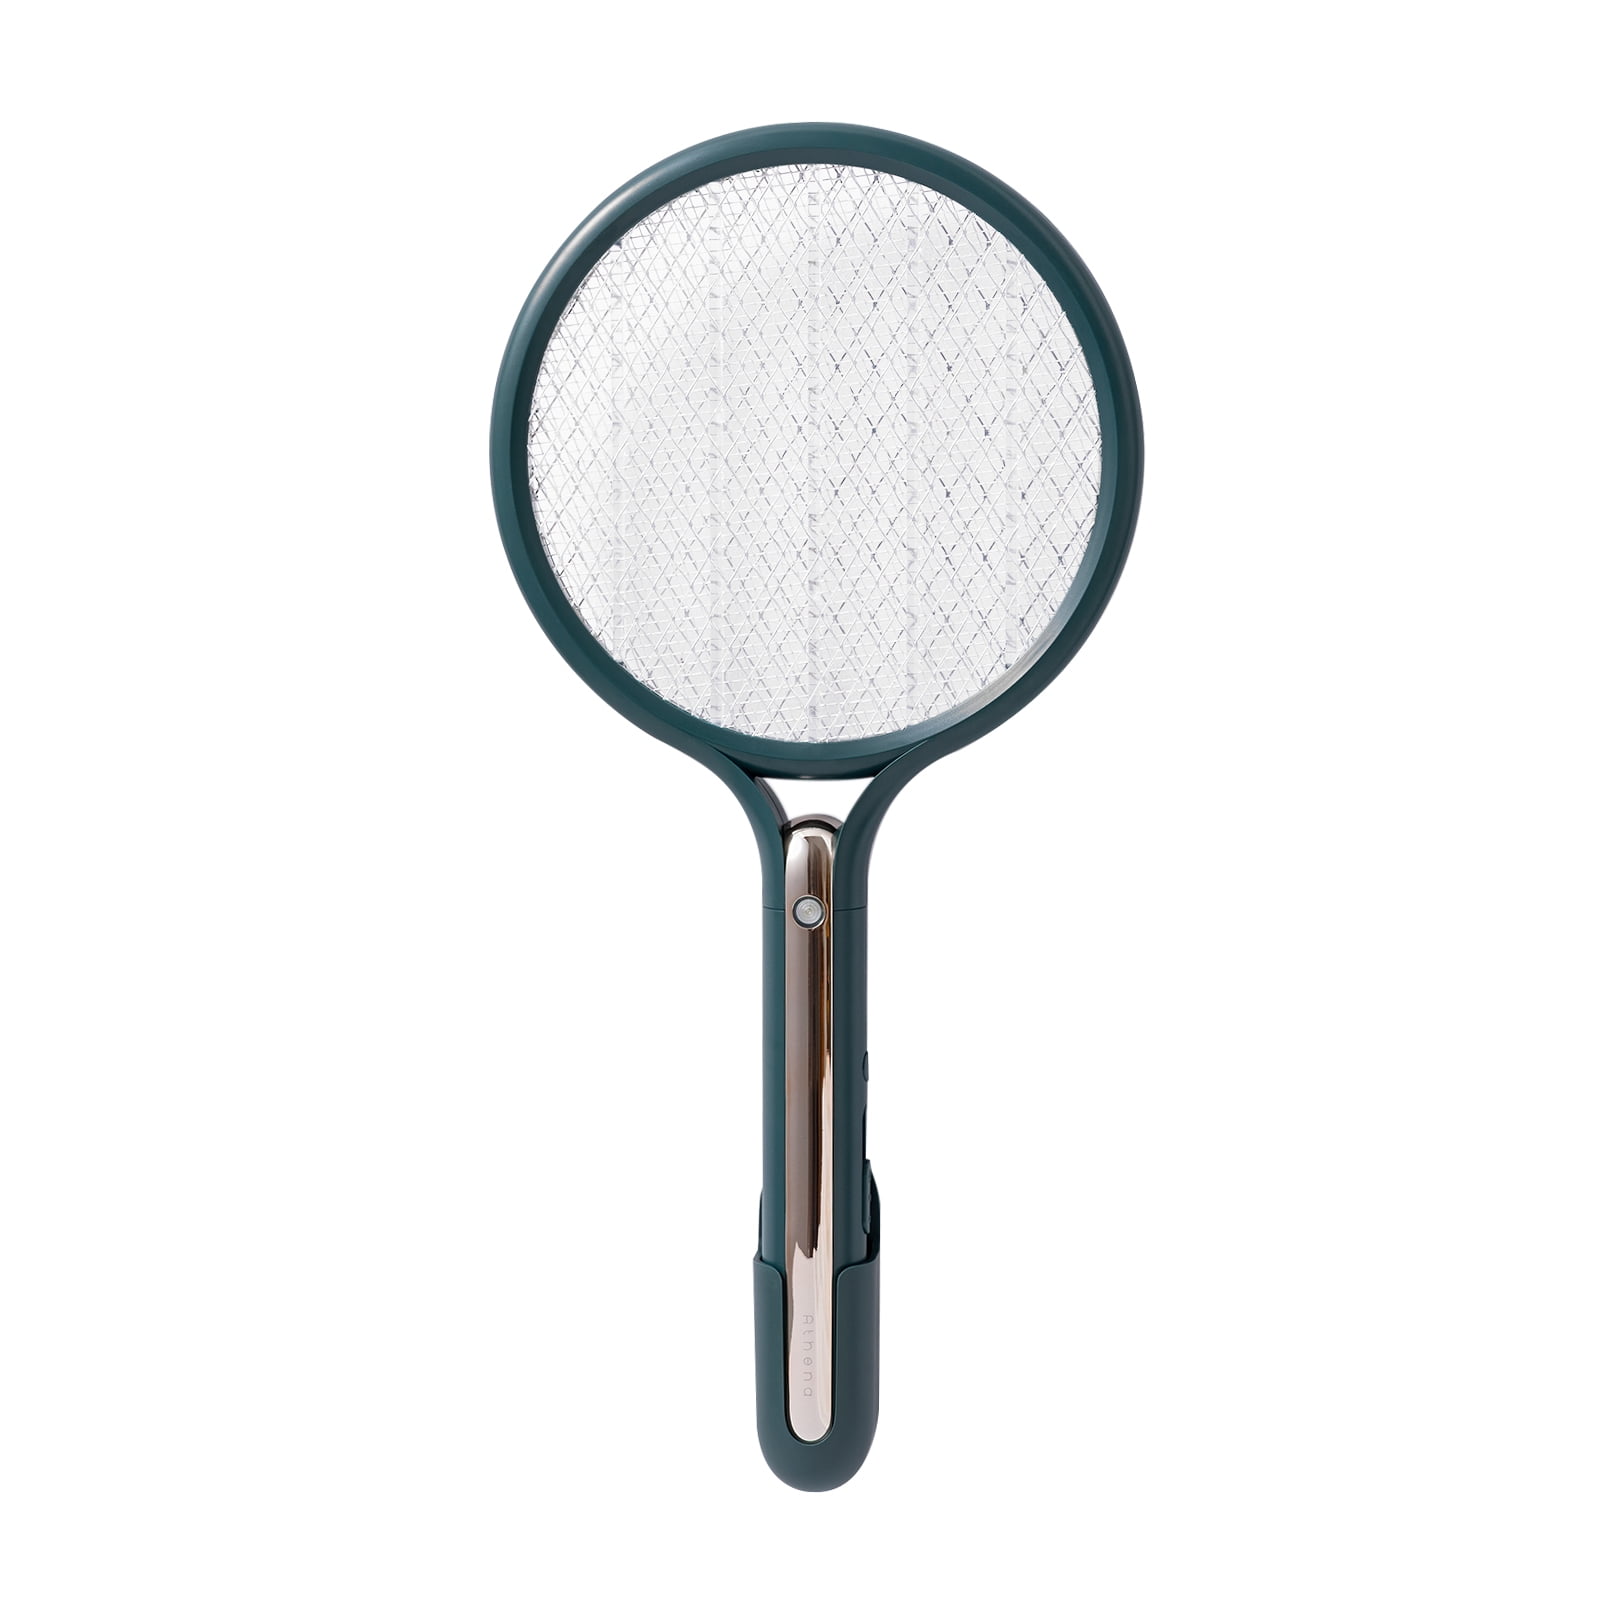 Details about   Fly Swatter Mosquito Electric Pest Control Racket Swatter Handheld DC Power 